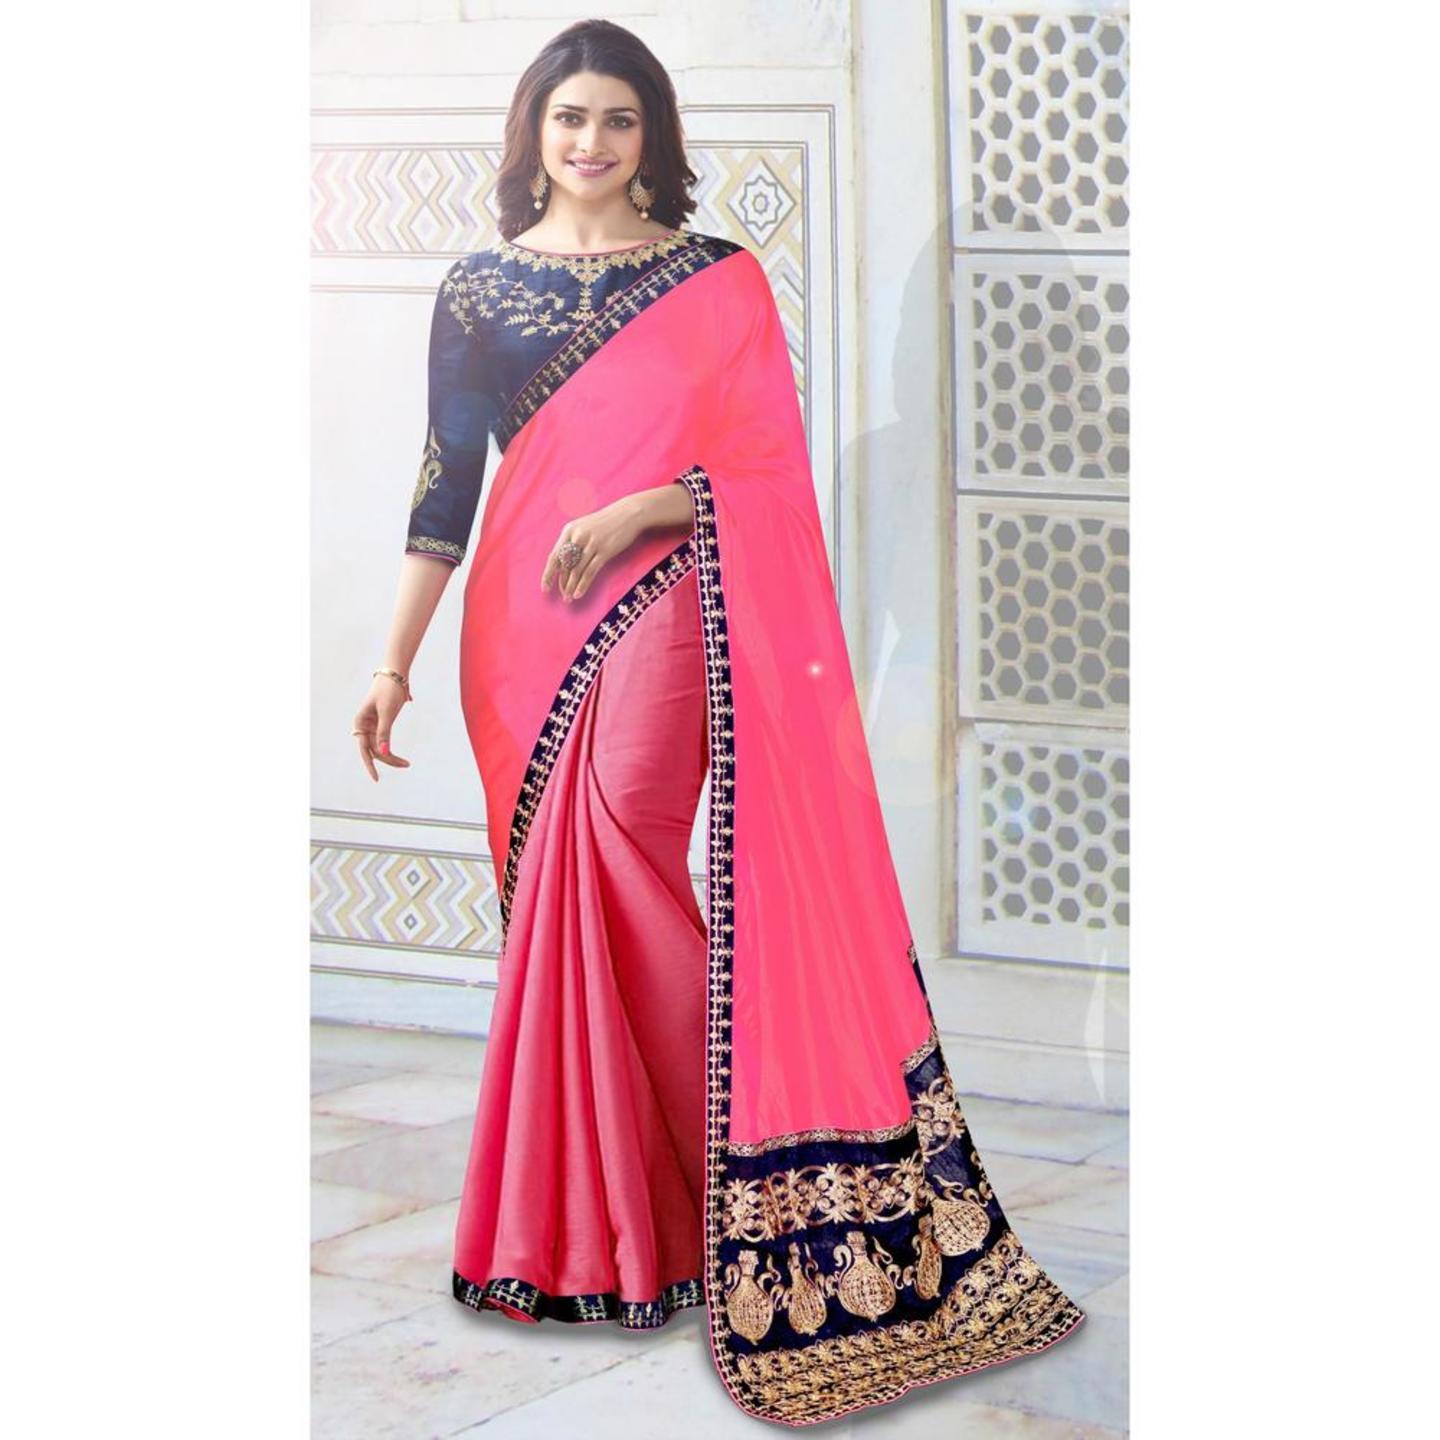 Robe Riche Pink Color Malai Silk Embroidery With Lace Saree